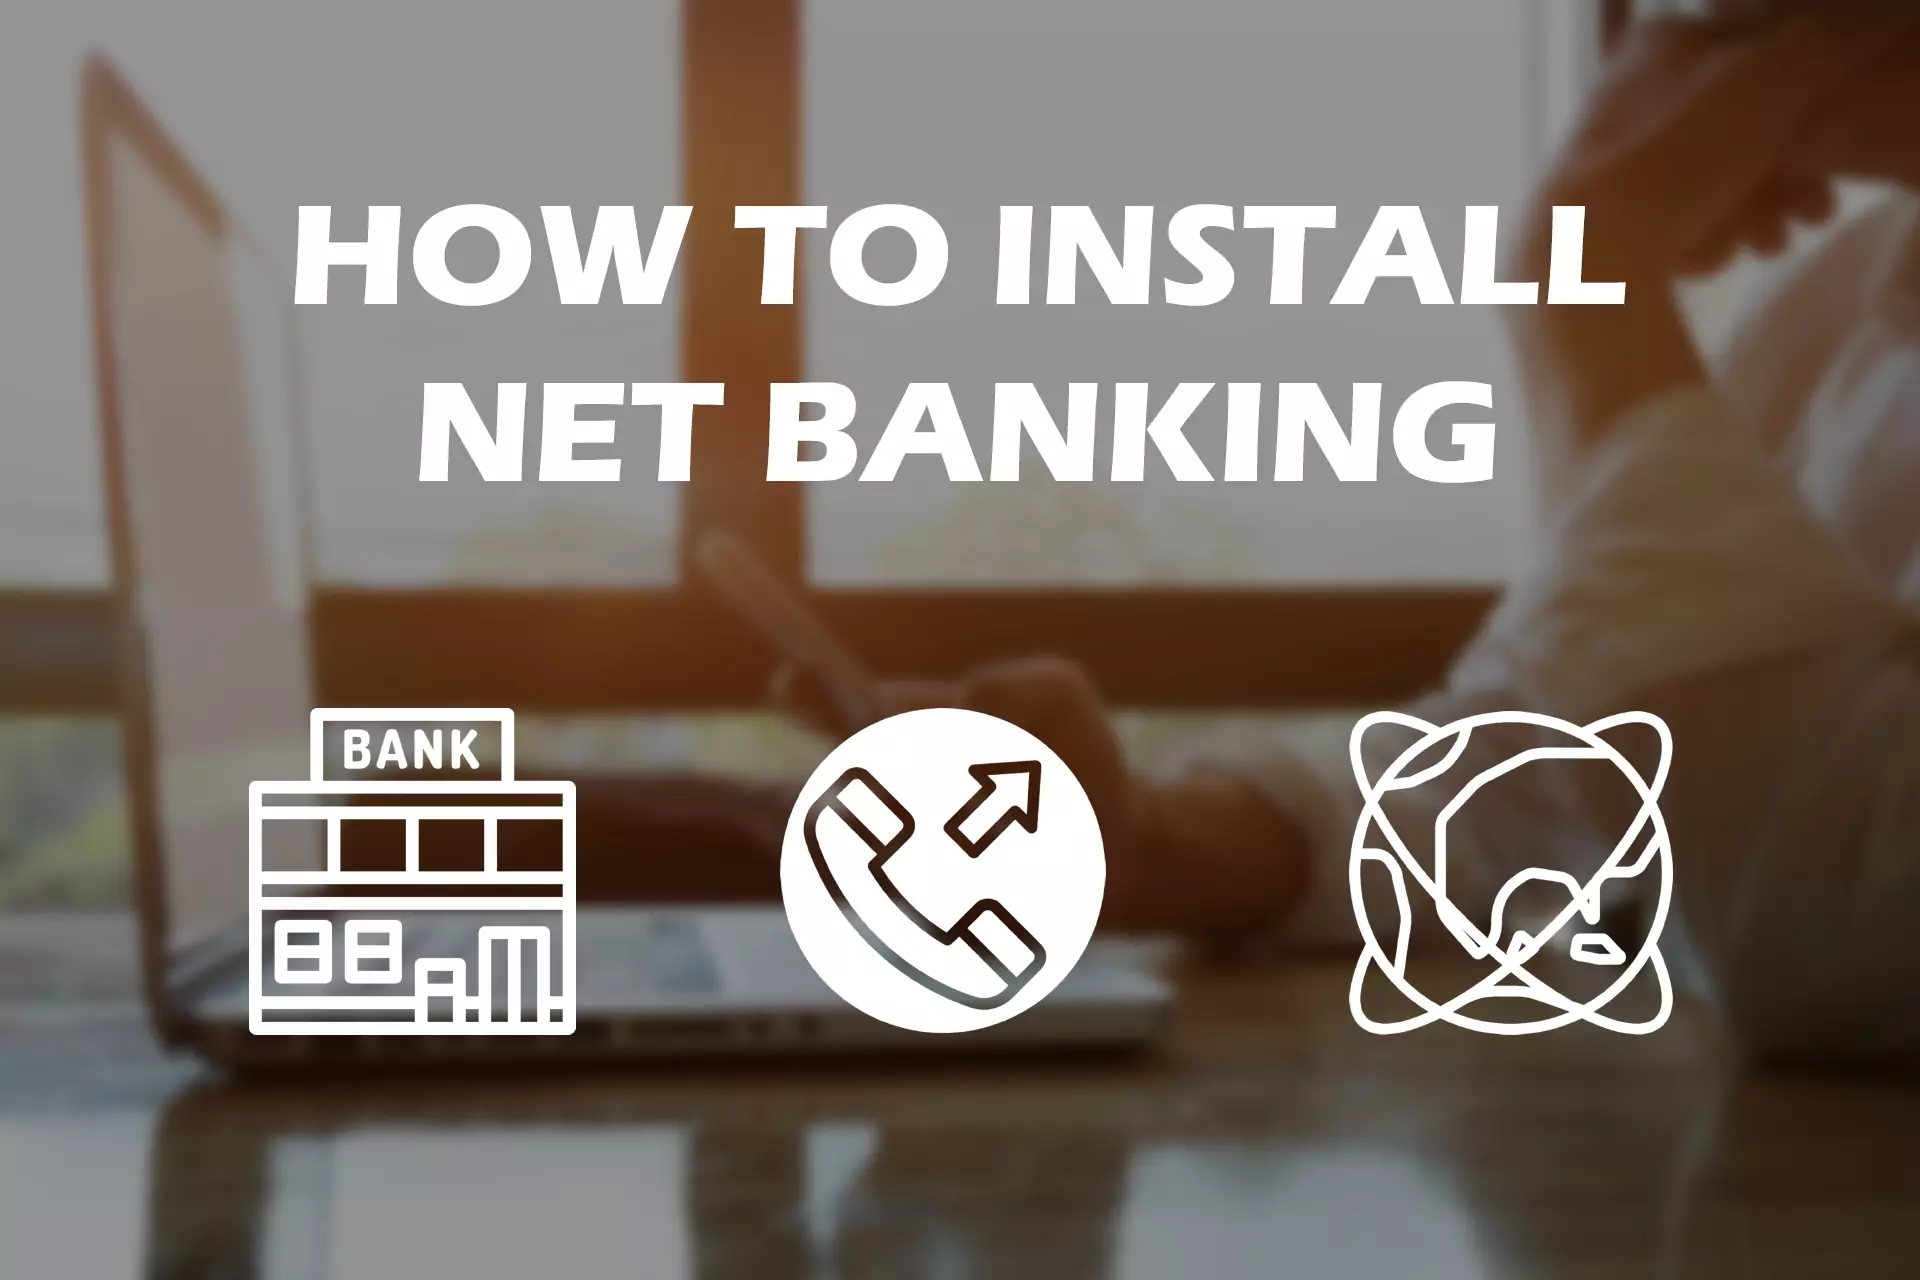 Visit bank, call support or use the Internet to install Net Banking.